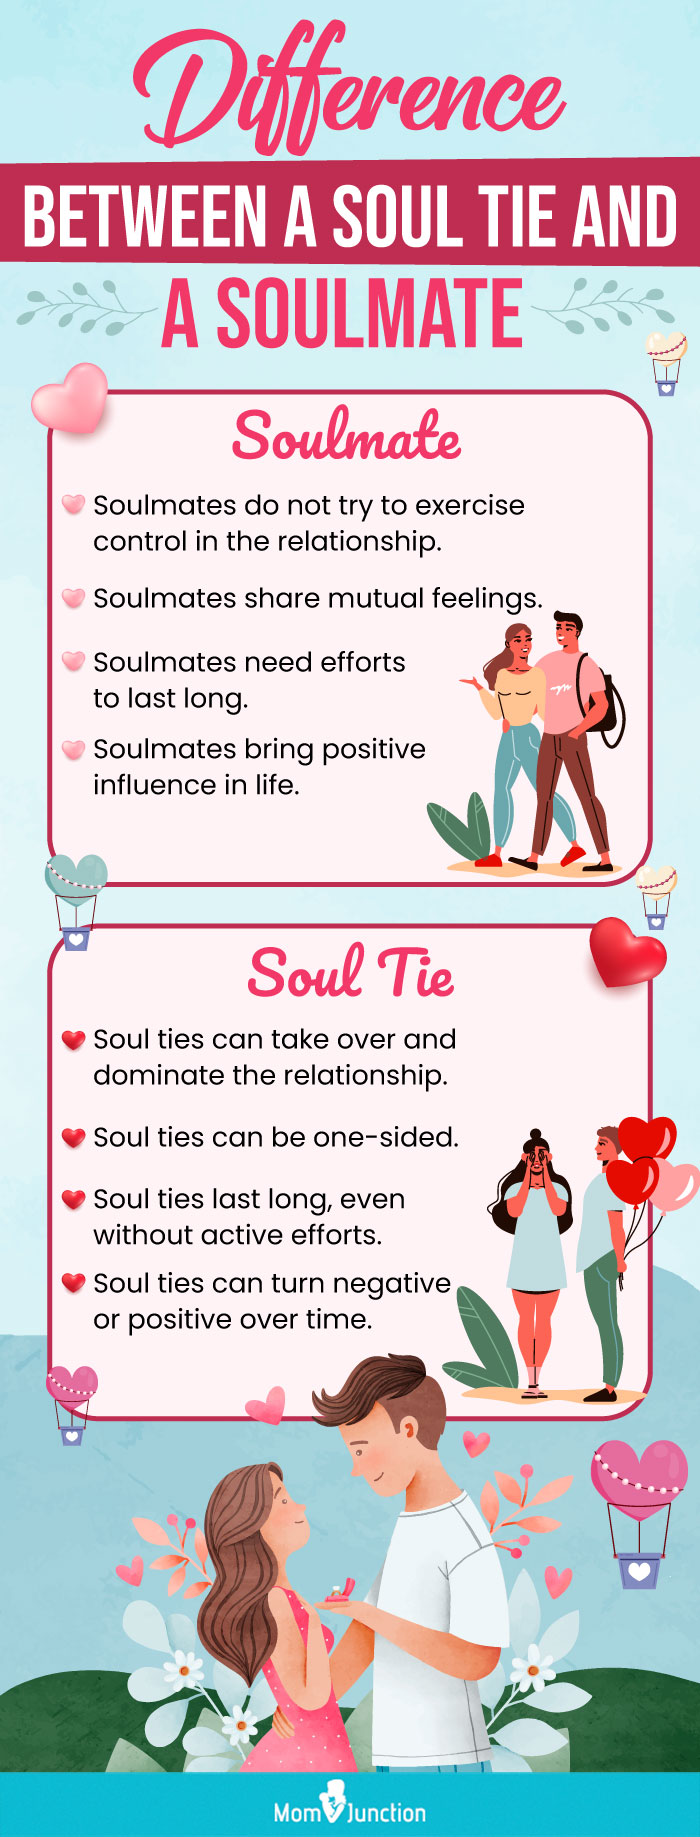 difference between a soul tie and a soulmate (infographic)